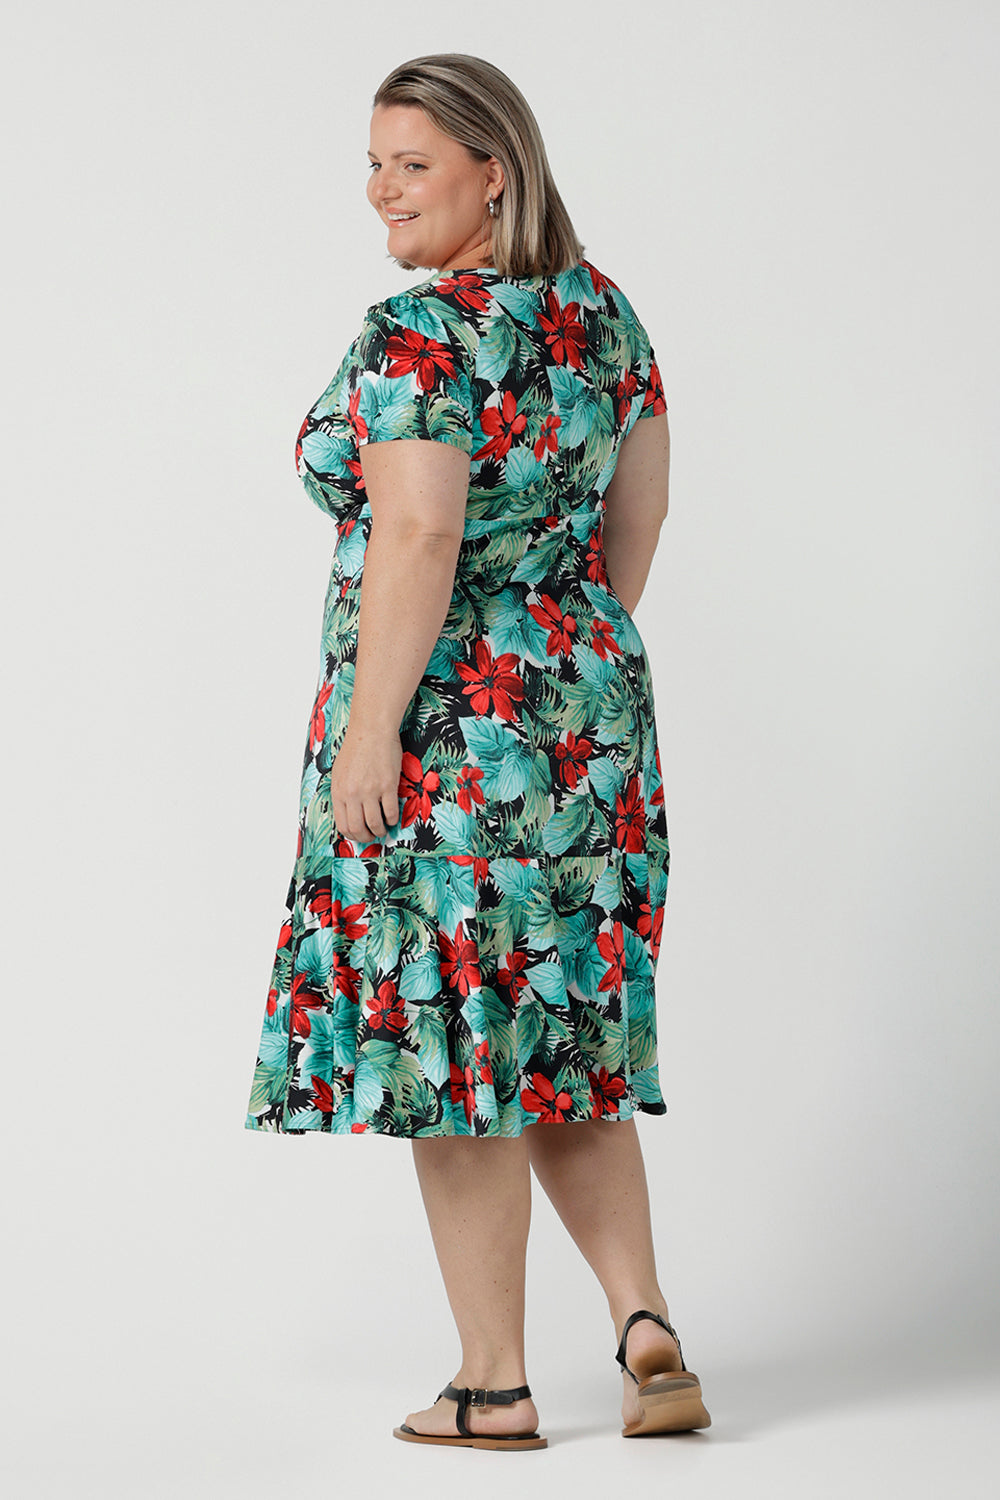 Back view of a size 18 Curvy woman wears the Jillian dress in Havana. A beautiful tropical print with a green leaf print and red flower on a white base that is tropical inspired. A sweetheart neckline style with an empire line. Tier on hem. Made in Australia for women. Size 8 - 24.